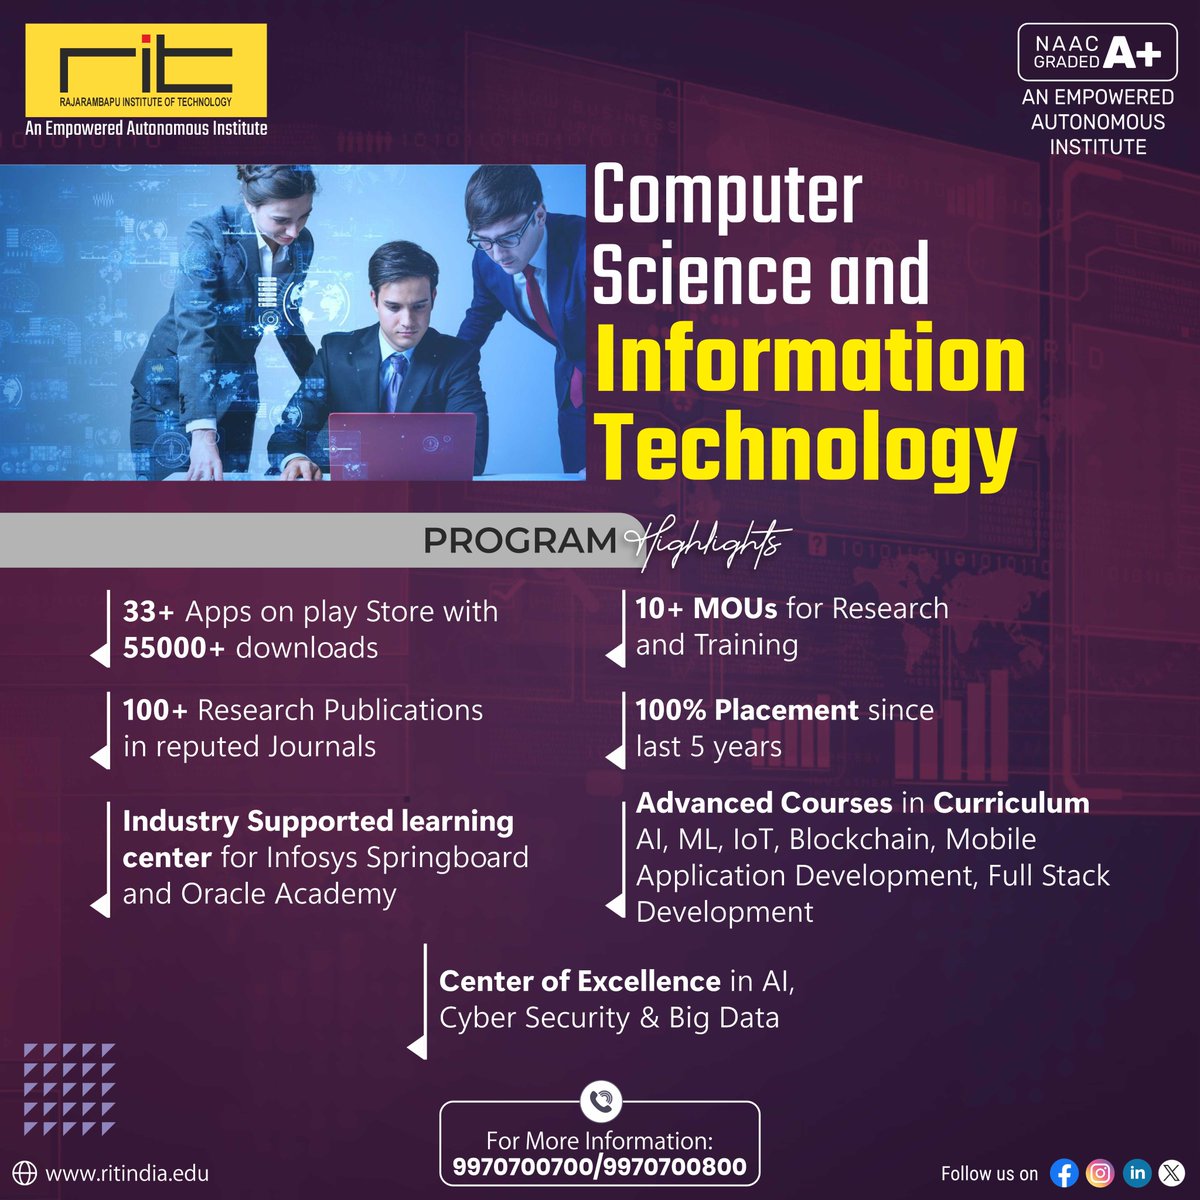 Unlock your potential with our cutting-edge Computer Science and Information Technology programs! Apply now and join a community of innovators shaping the future of technology. 🚀 #EngineeringAdmissions #CSIT #FutureTechLeaders